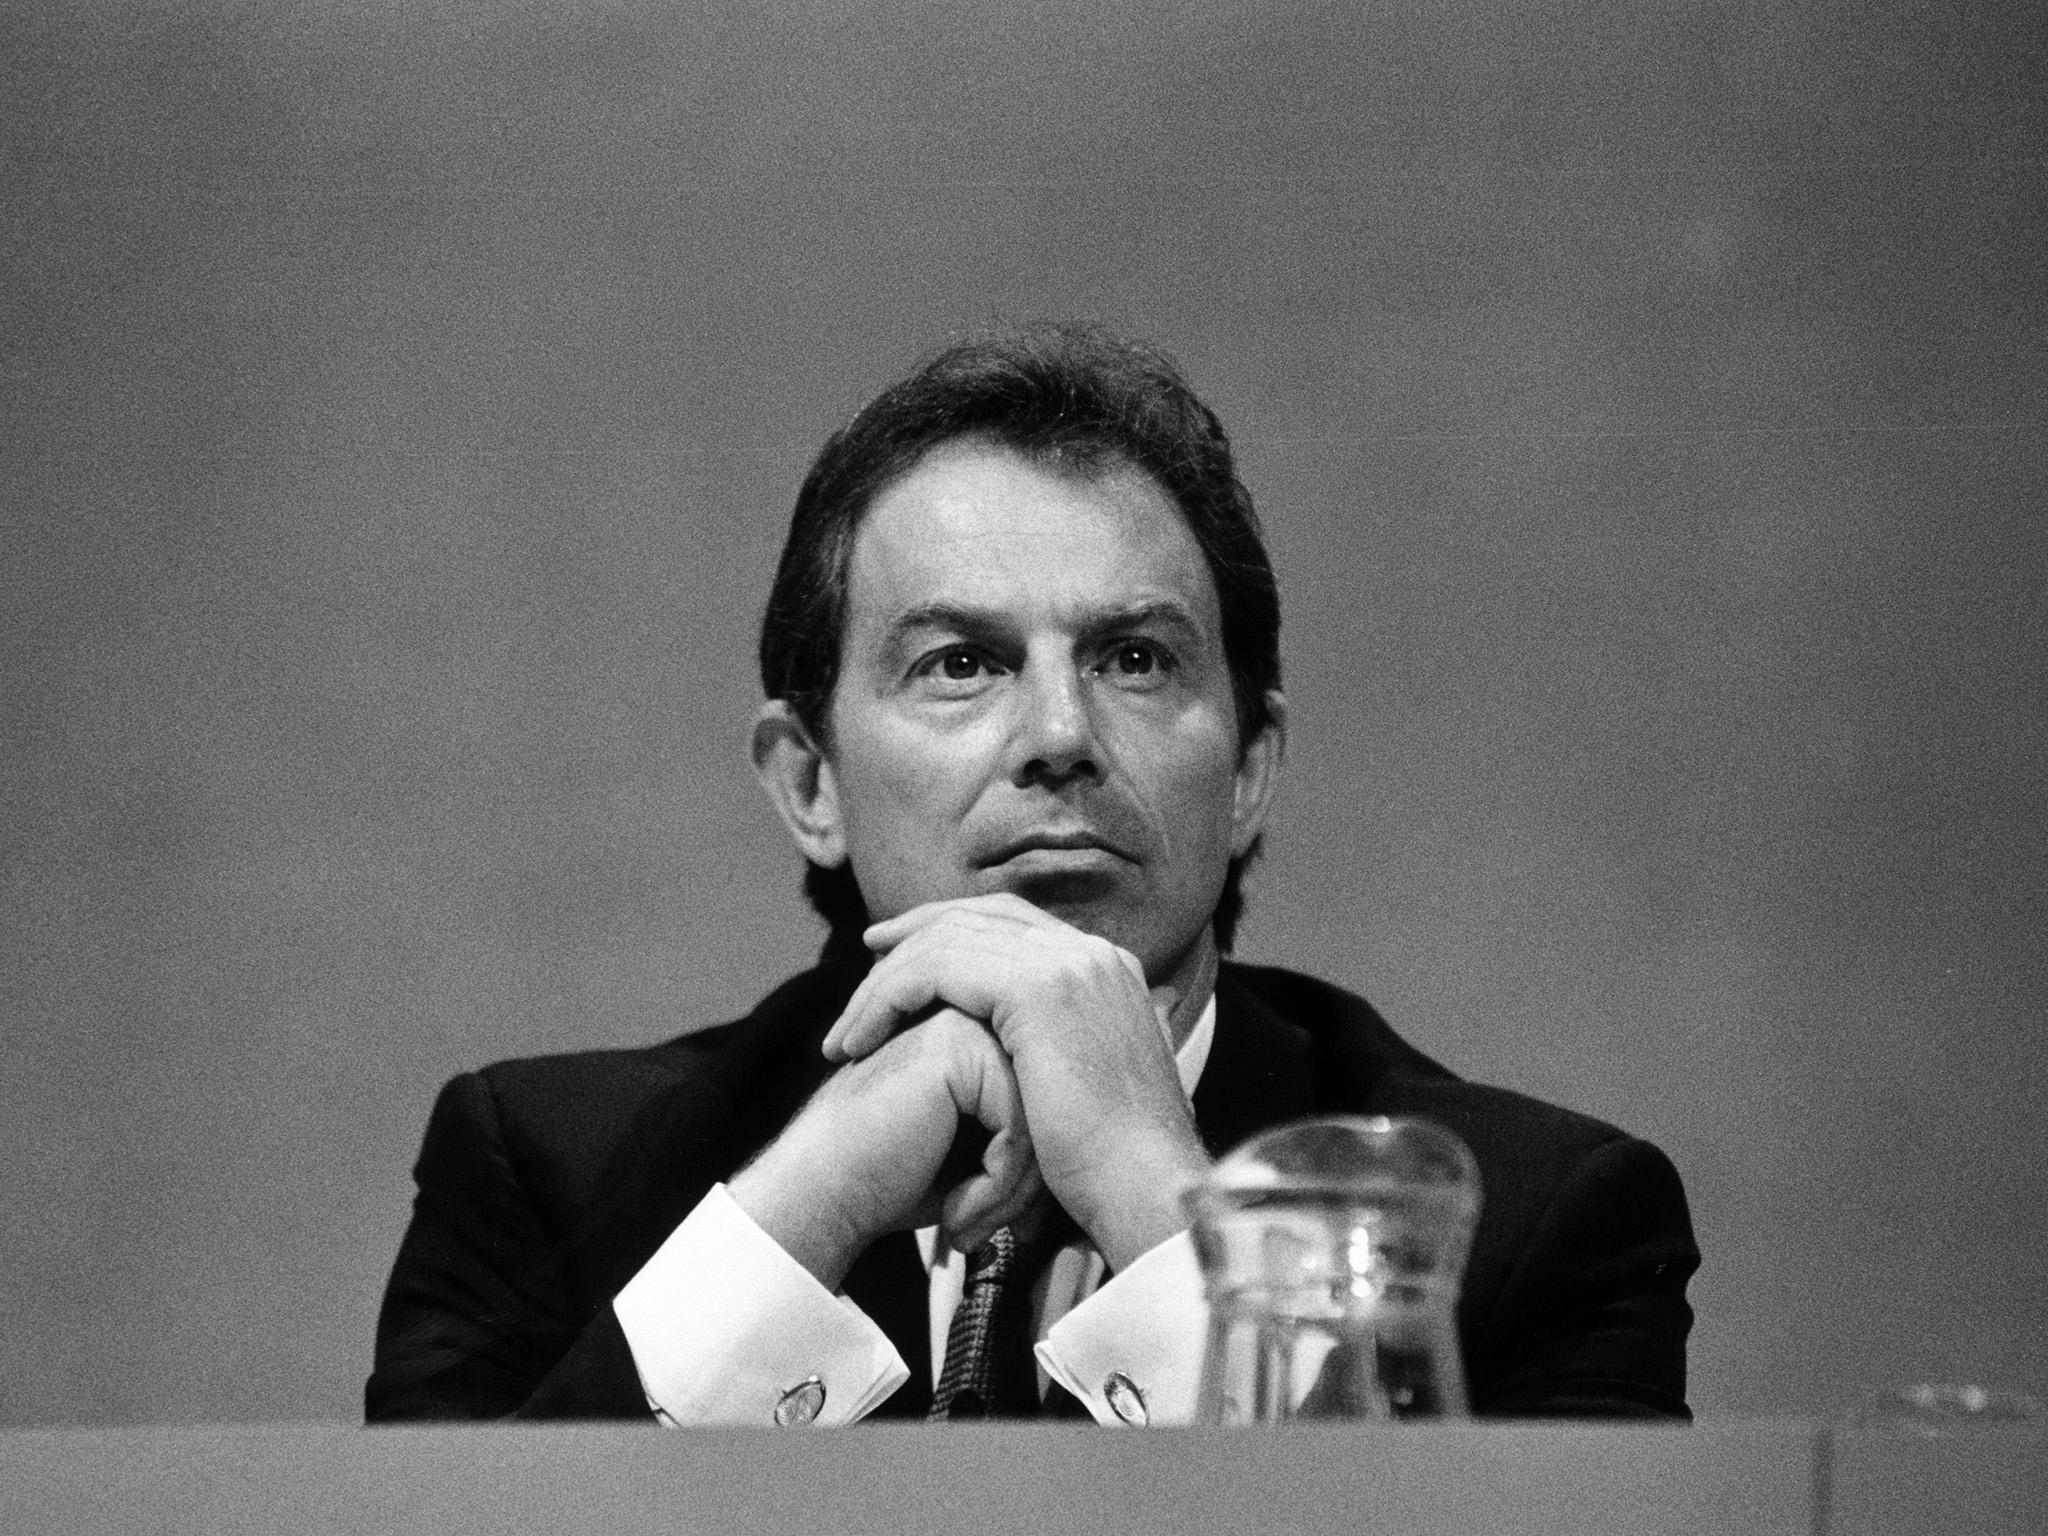 Tony Blair at a Labour party conference in Brighton in 1997